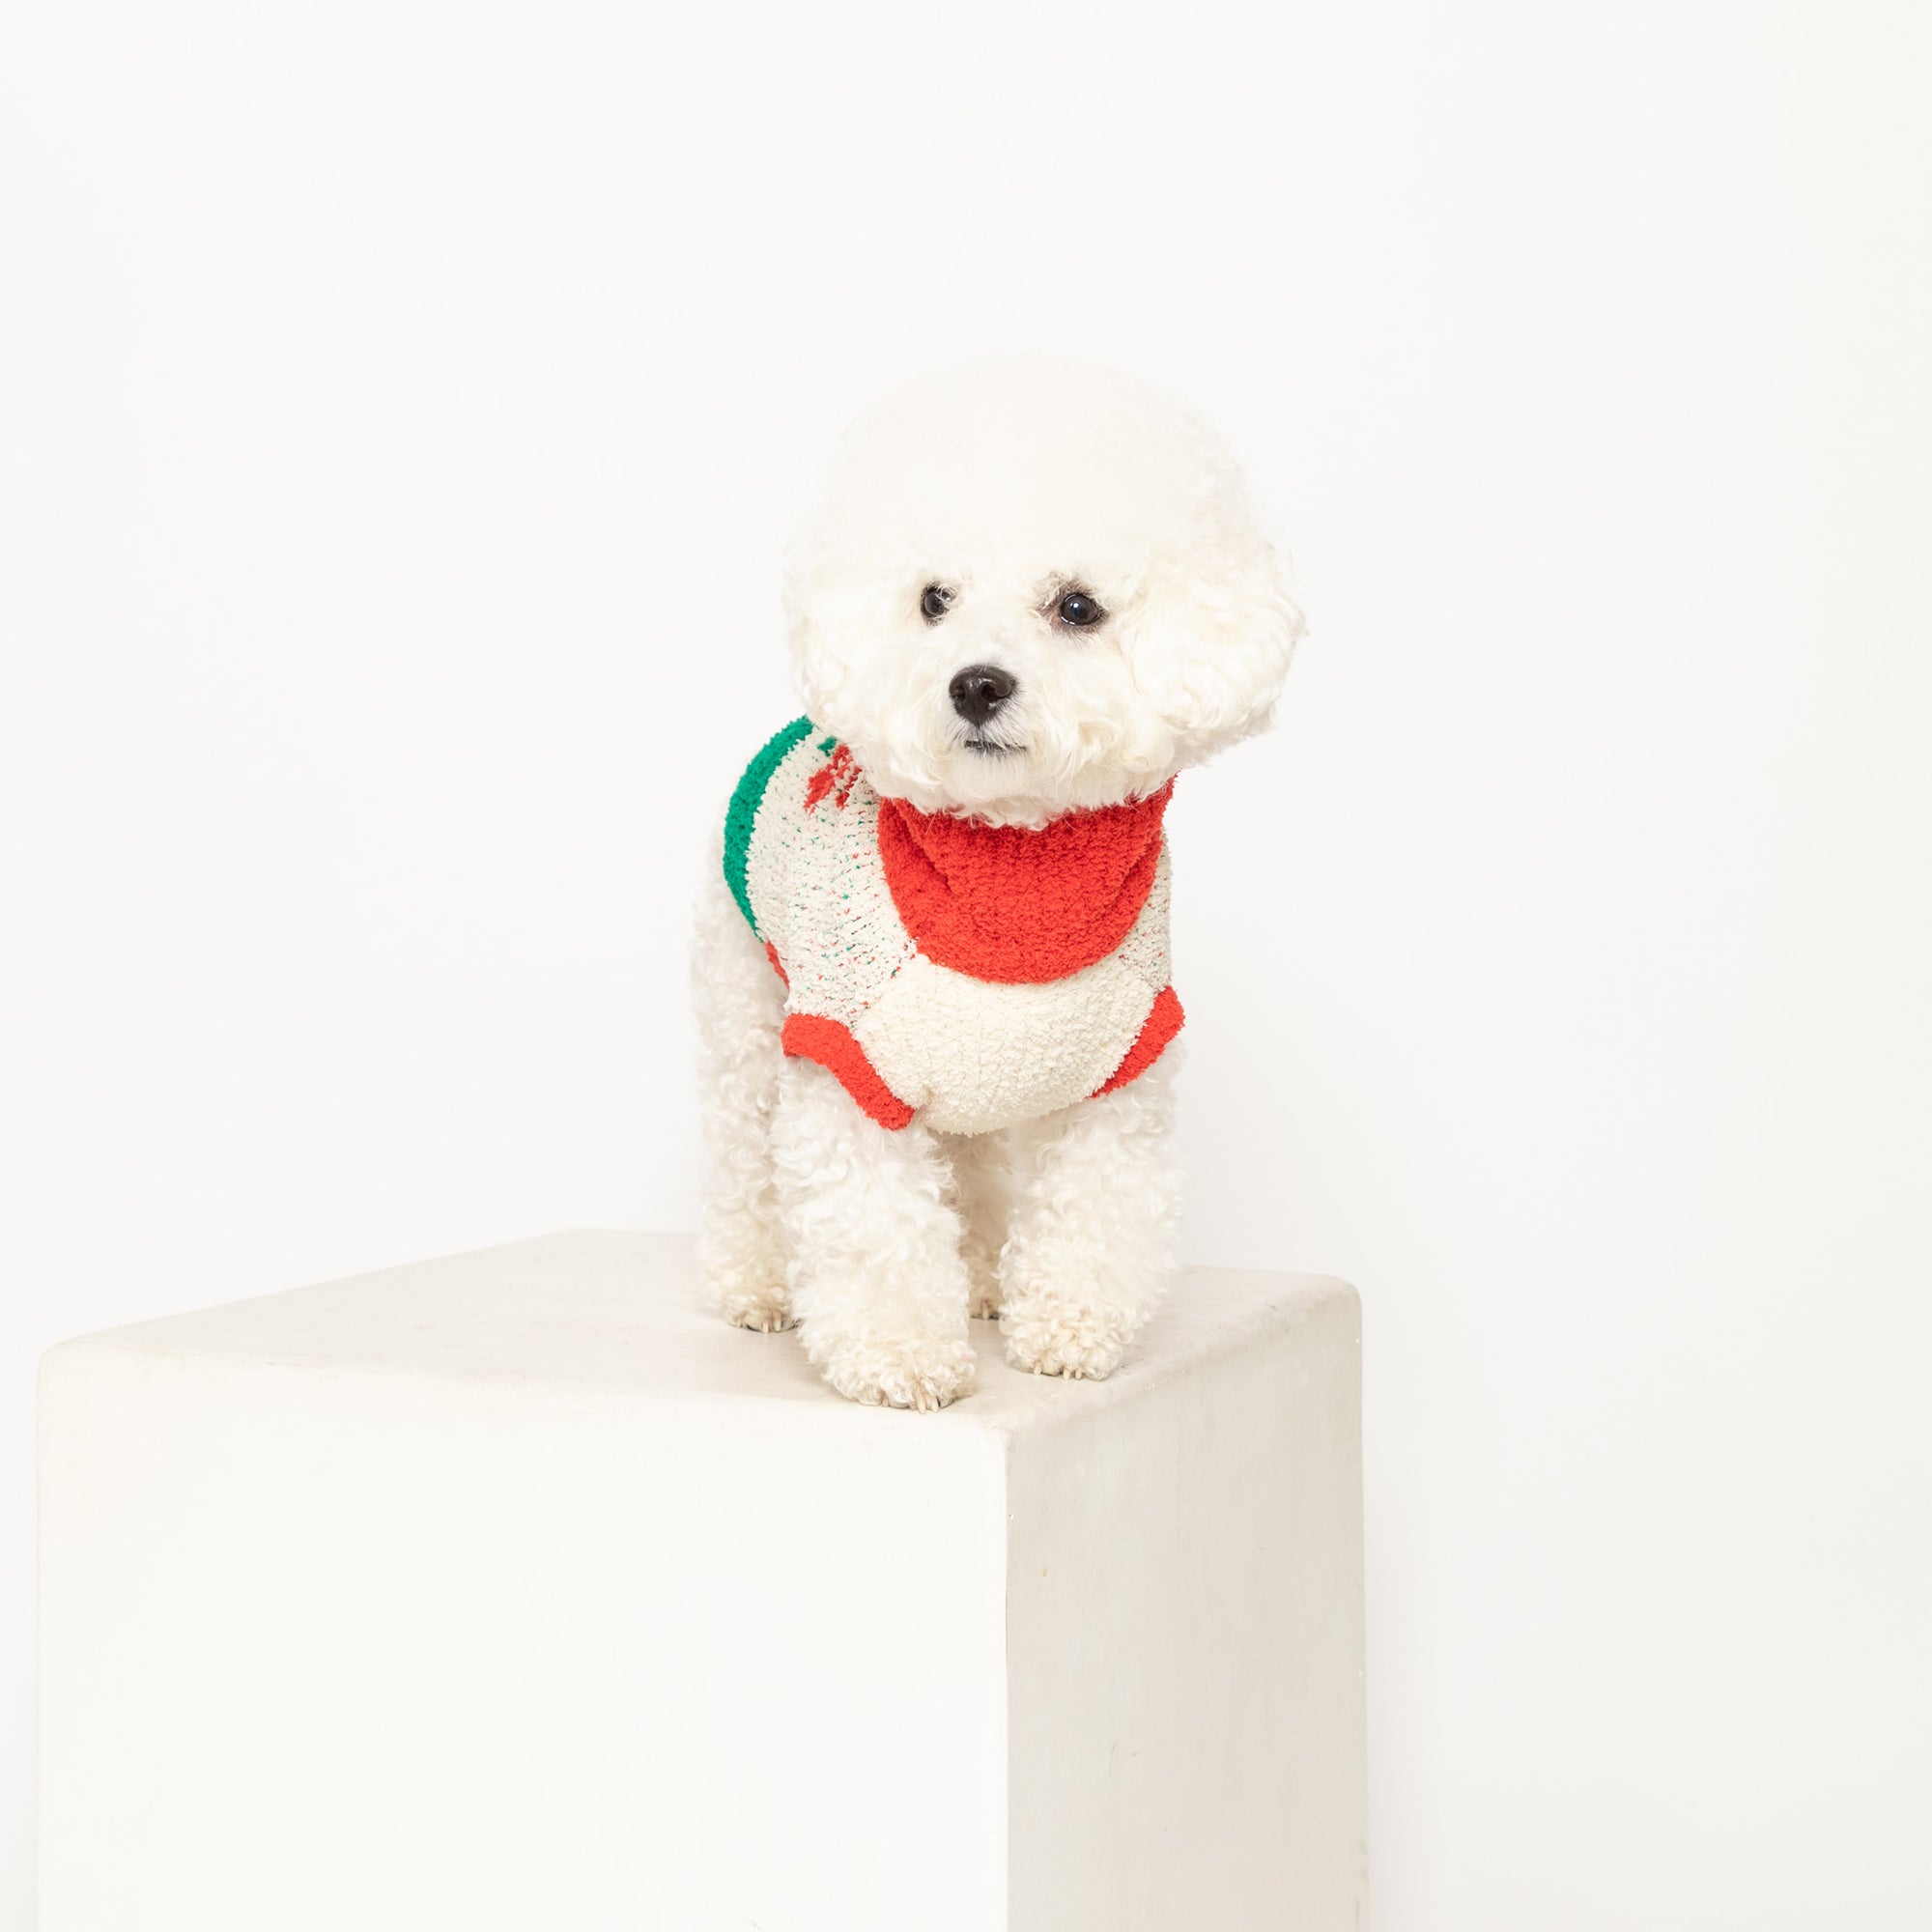  White Bichon Frise in a red and green sweater perched on a pedestal against a white background.